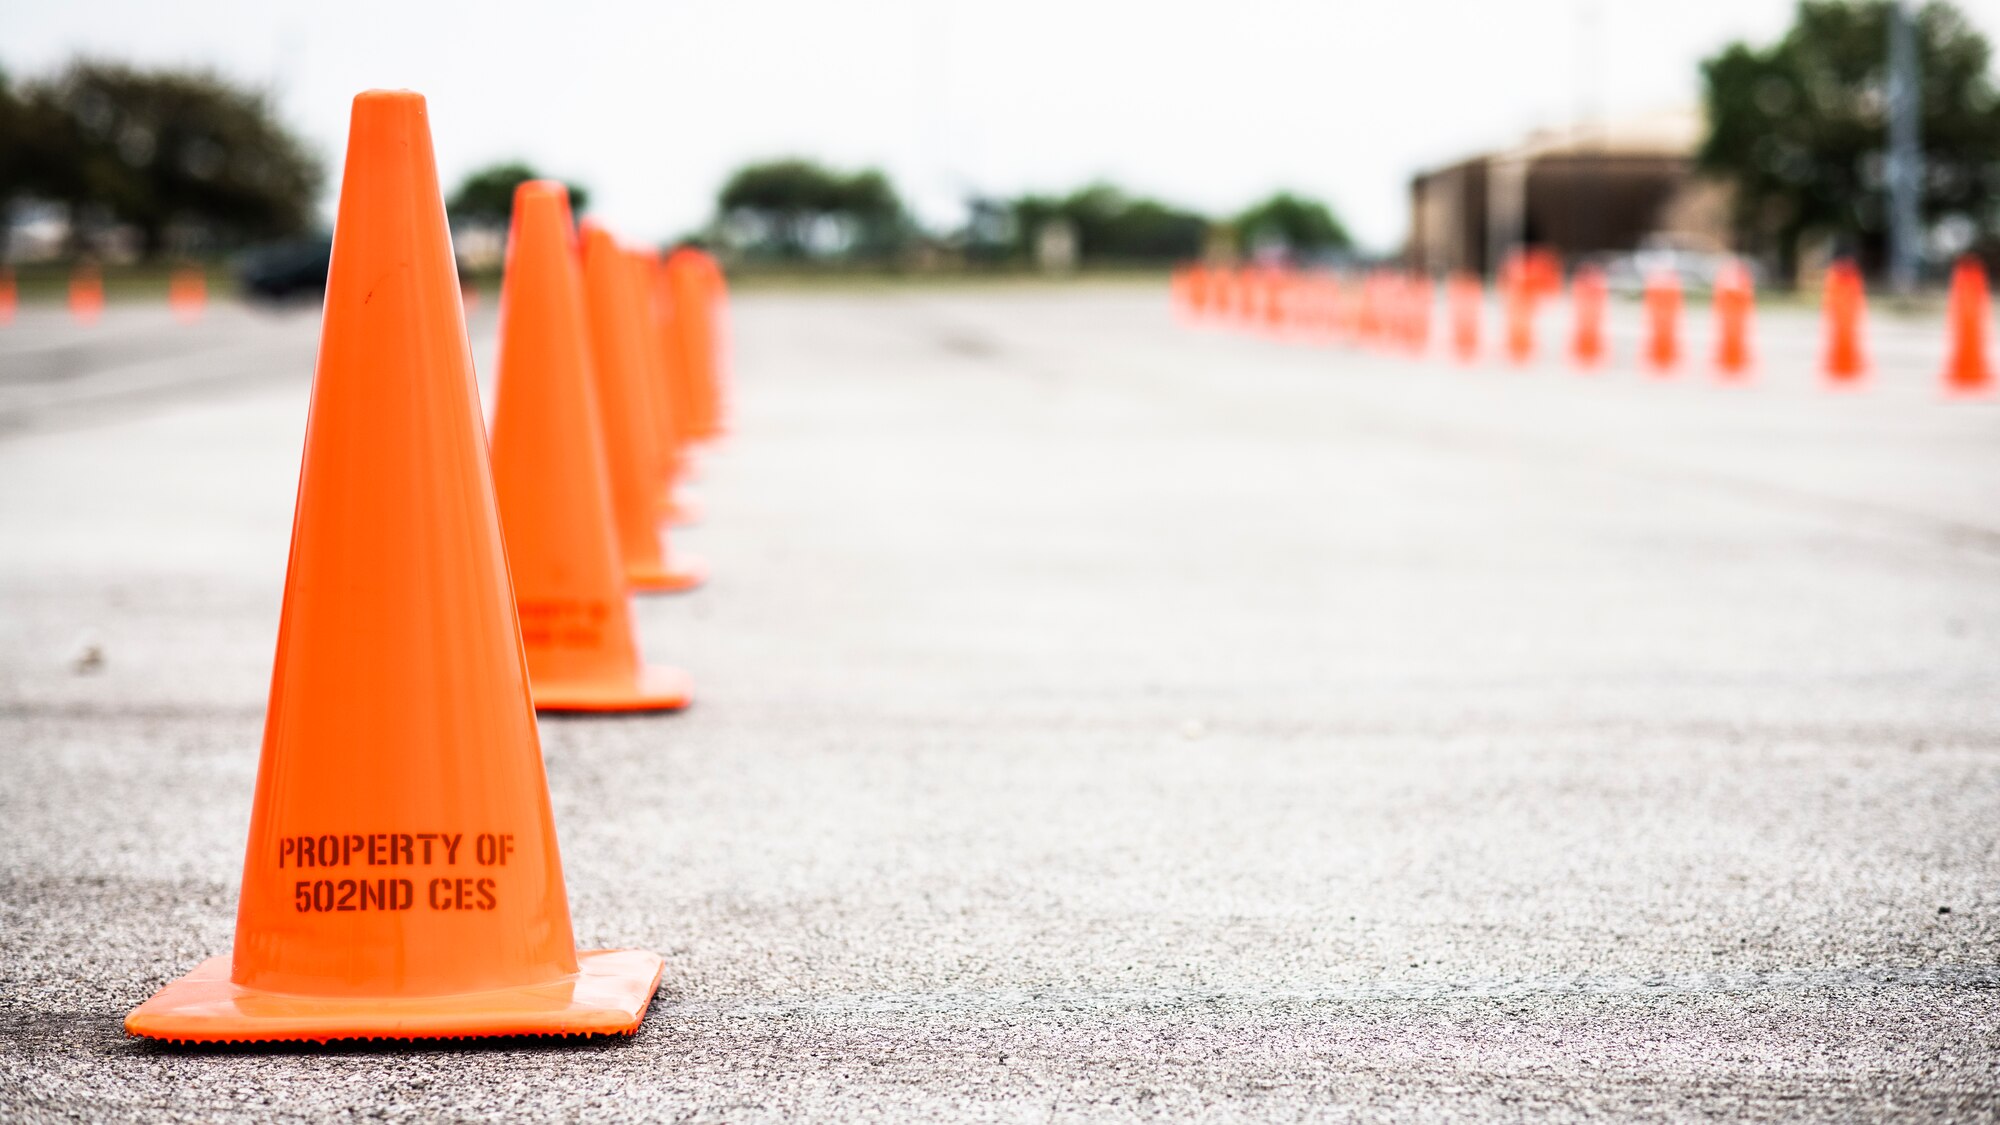 Cones are lined up March 19, 2020 in preparation for the opening of a drive-through screening and testing line beginning March 20, 2020 at Joint Base San Antonio-Lackland, Texas. The line will be open 9 a.m. to 2 p.m. Monday through Friday for anyone experiencing flu-like symptoms prior to entering Wilford Hall Ambulatory Surgical Center. (U.S. Air Force photo by Tech. Sgt. Katherine Spessa)